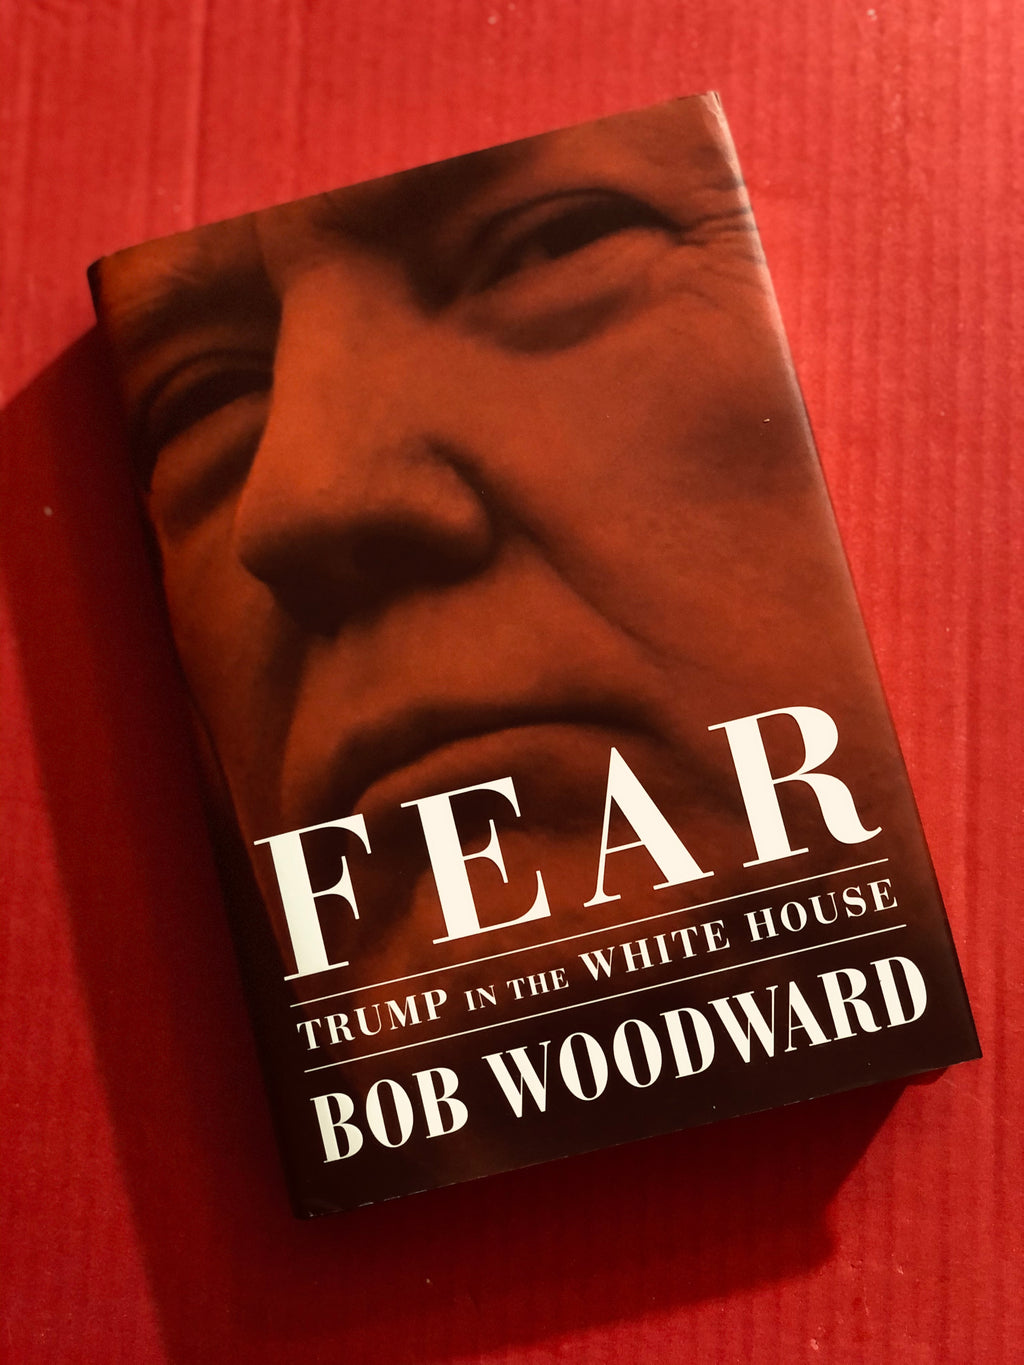 Fear Trump in the White House- By Bob Woodward